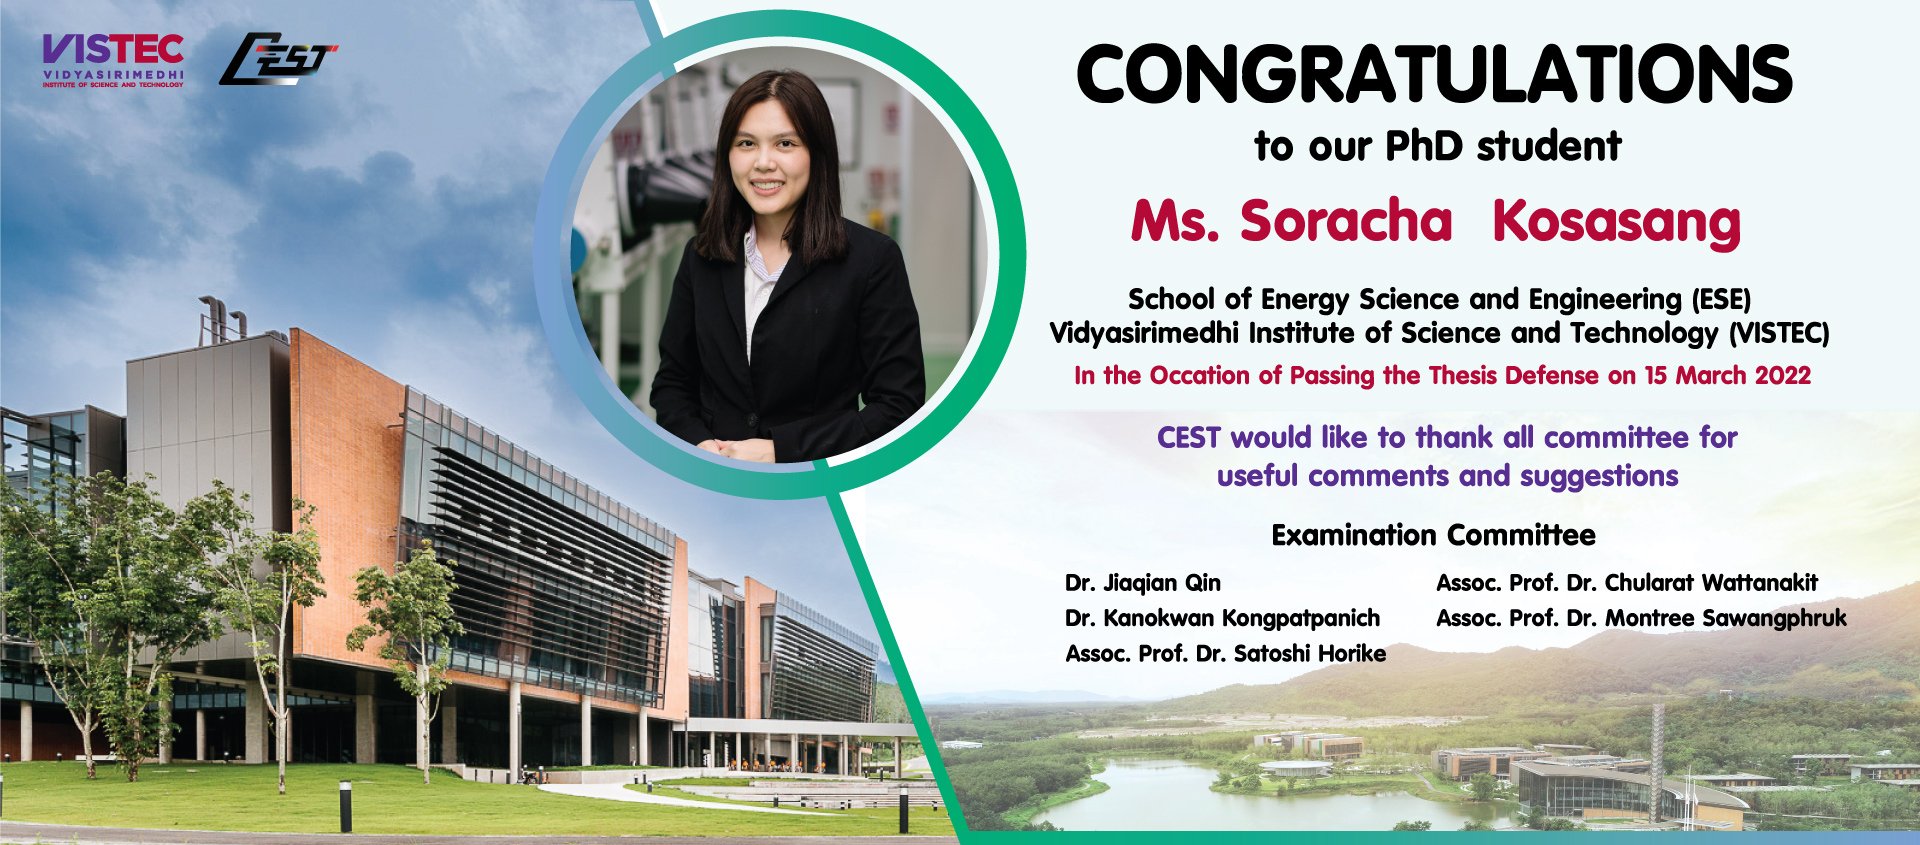 Congratuations !! to our PhD student Ms. Soracha  Kosasang School of Energy Science and Engineering (ESE) Vidyasirimedhi Institute of Science and Technology (VISTEC) In the Occation of Passing the Thesis Defense on 15th March 2022 CEST would like to thank